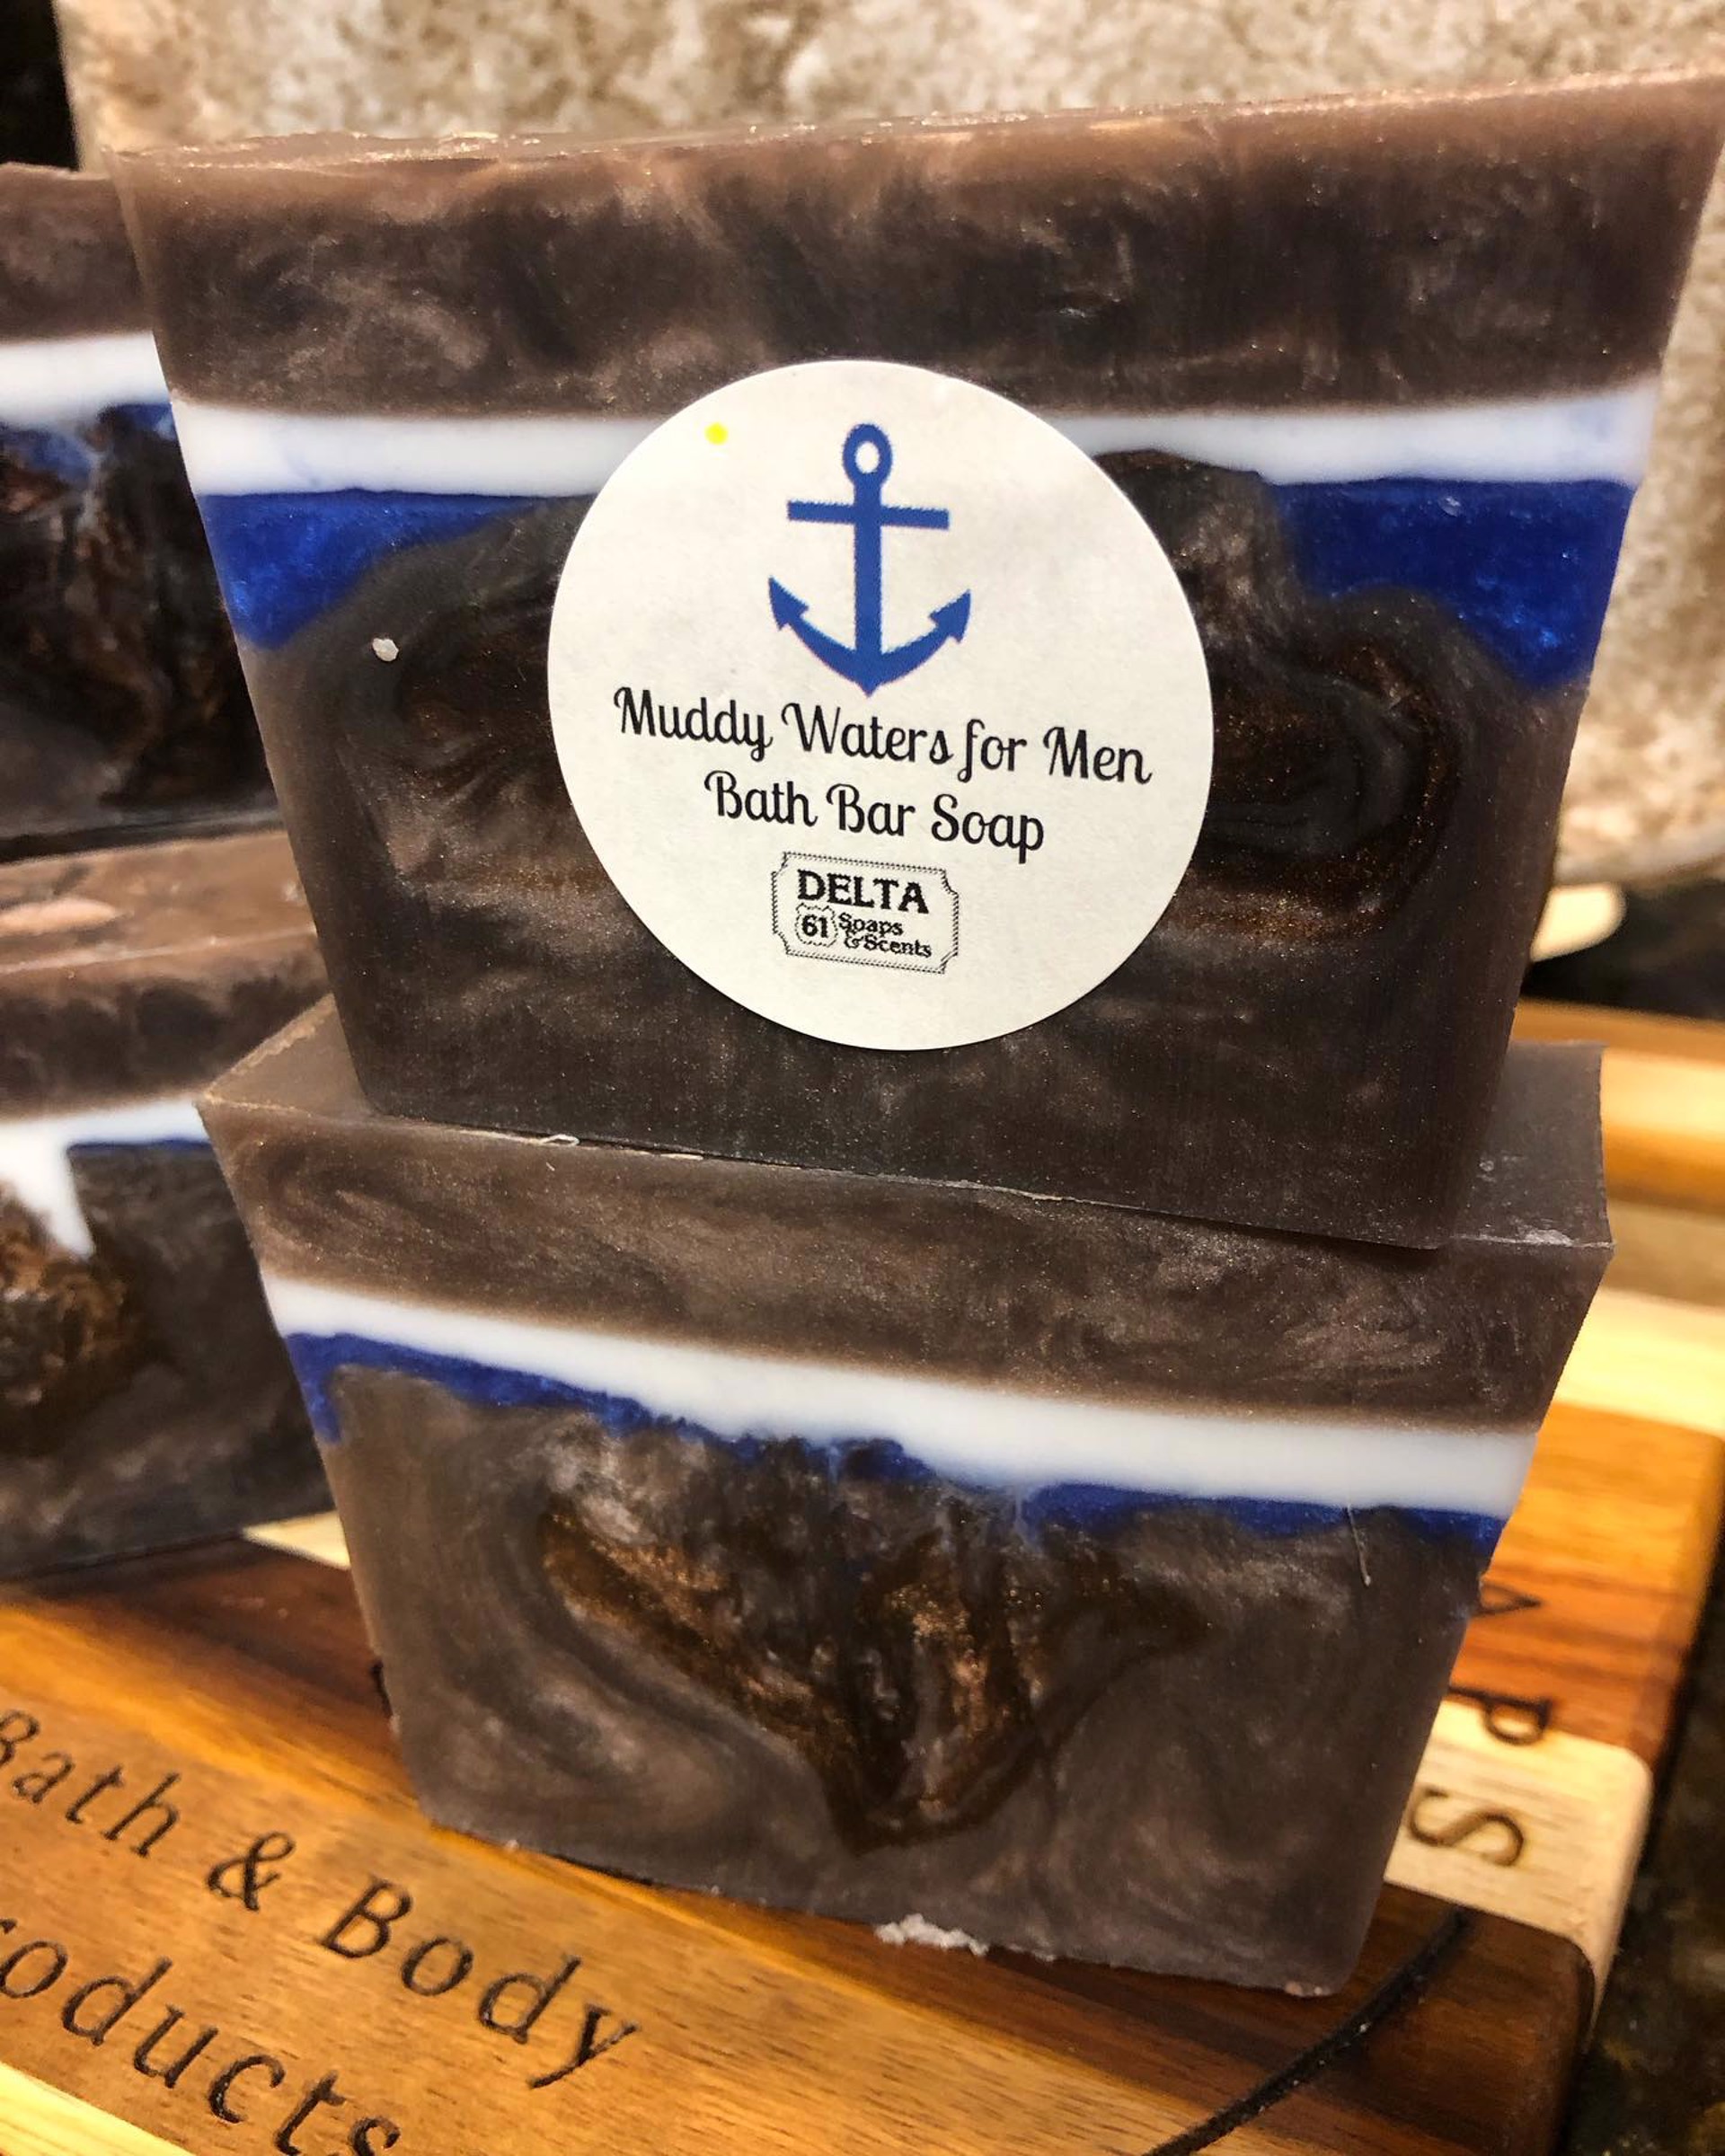 Muddy Waters for Men Bar Soap by Delta Soaps and Scents